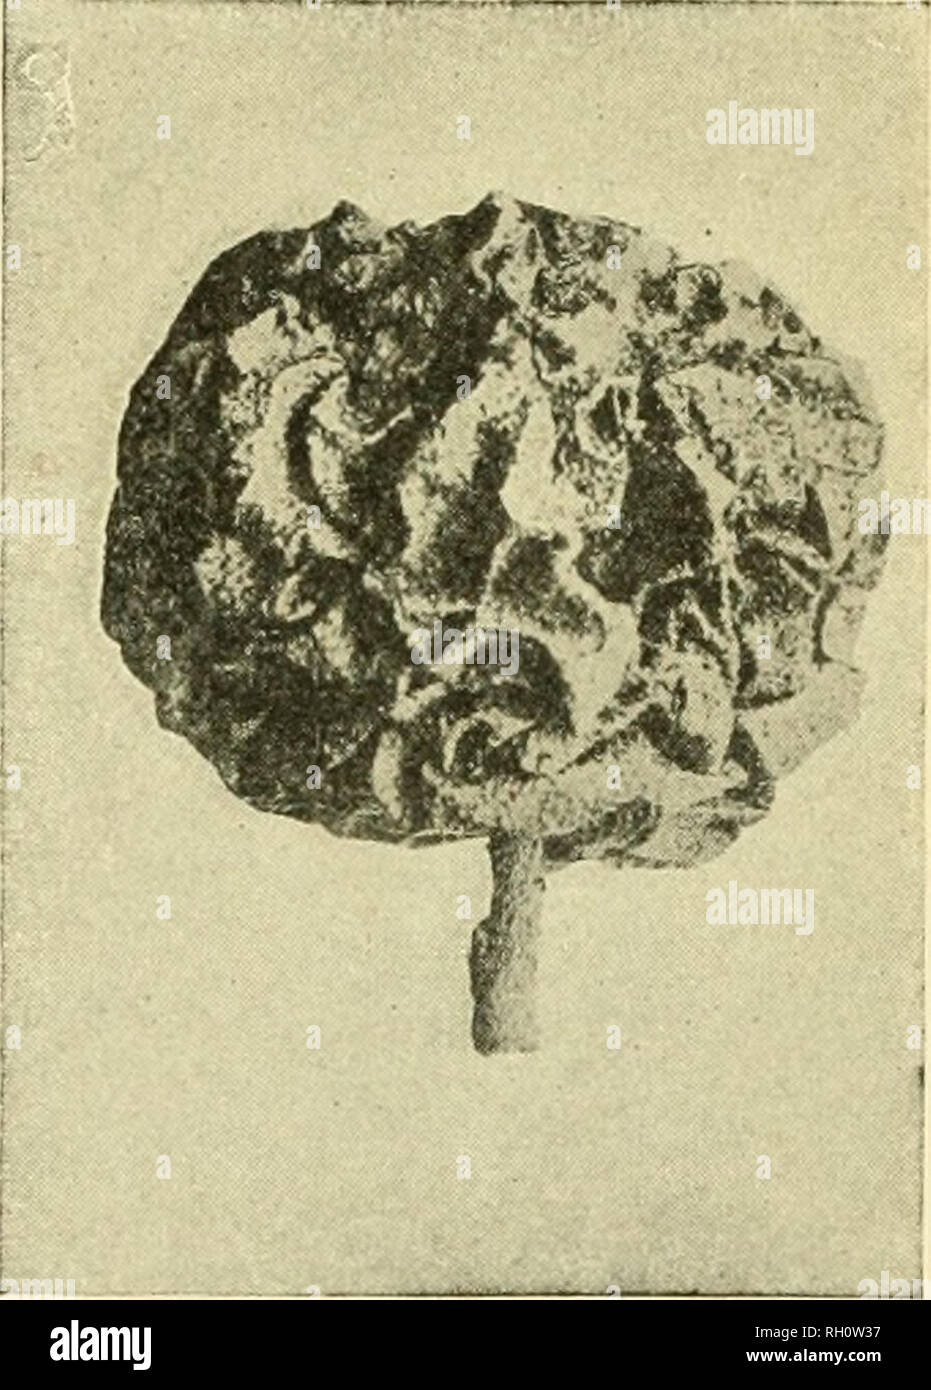 . Bulletin. Agriculture. April, 1912.] SOME APPLE DISEASES—TREATMENT. 17 BLACK ROT, CANKER AND LEAF SPOT. Sphoeropsis Malorum Berk. The three diseases given above have been found to be due to a single fungus, ^'Sphoeropsis Malorum.&quot; The black rot of the apple is very common in New Hampshire. It is dark brown or black in color and the affected tissue comparatively firm. It is thus readily distinguished from the soft rots. It may start on any part of the fruit, but often begins at the blossom and fre- quently follows insect stings. The disease is primarily a rot of ripe fruit, but it may of Stock Photo